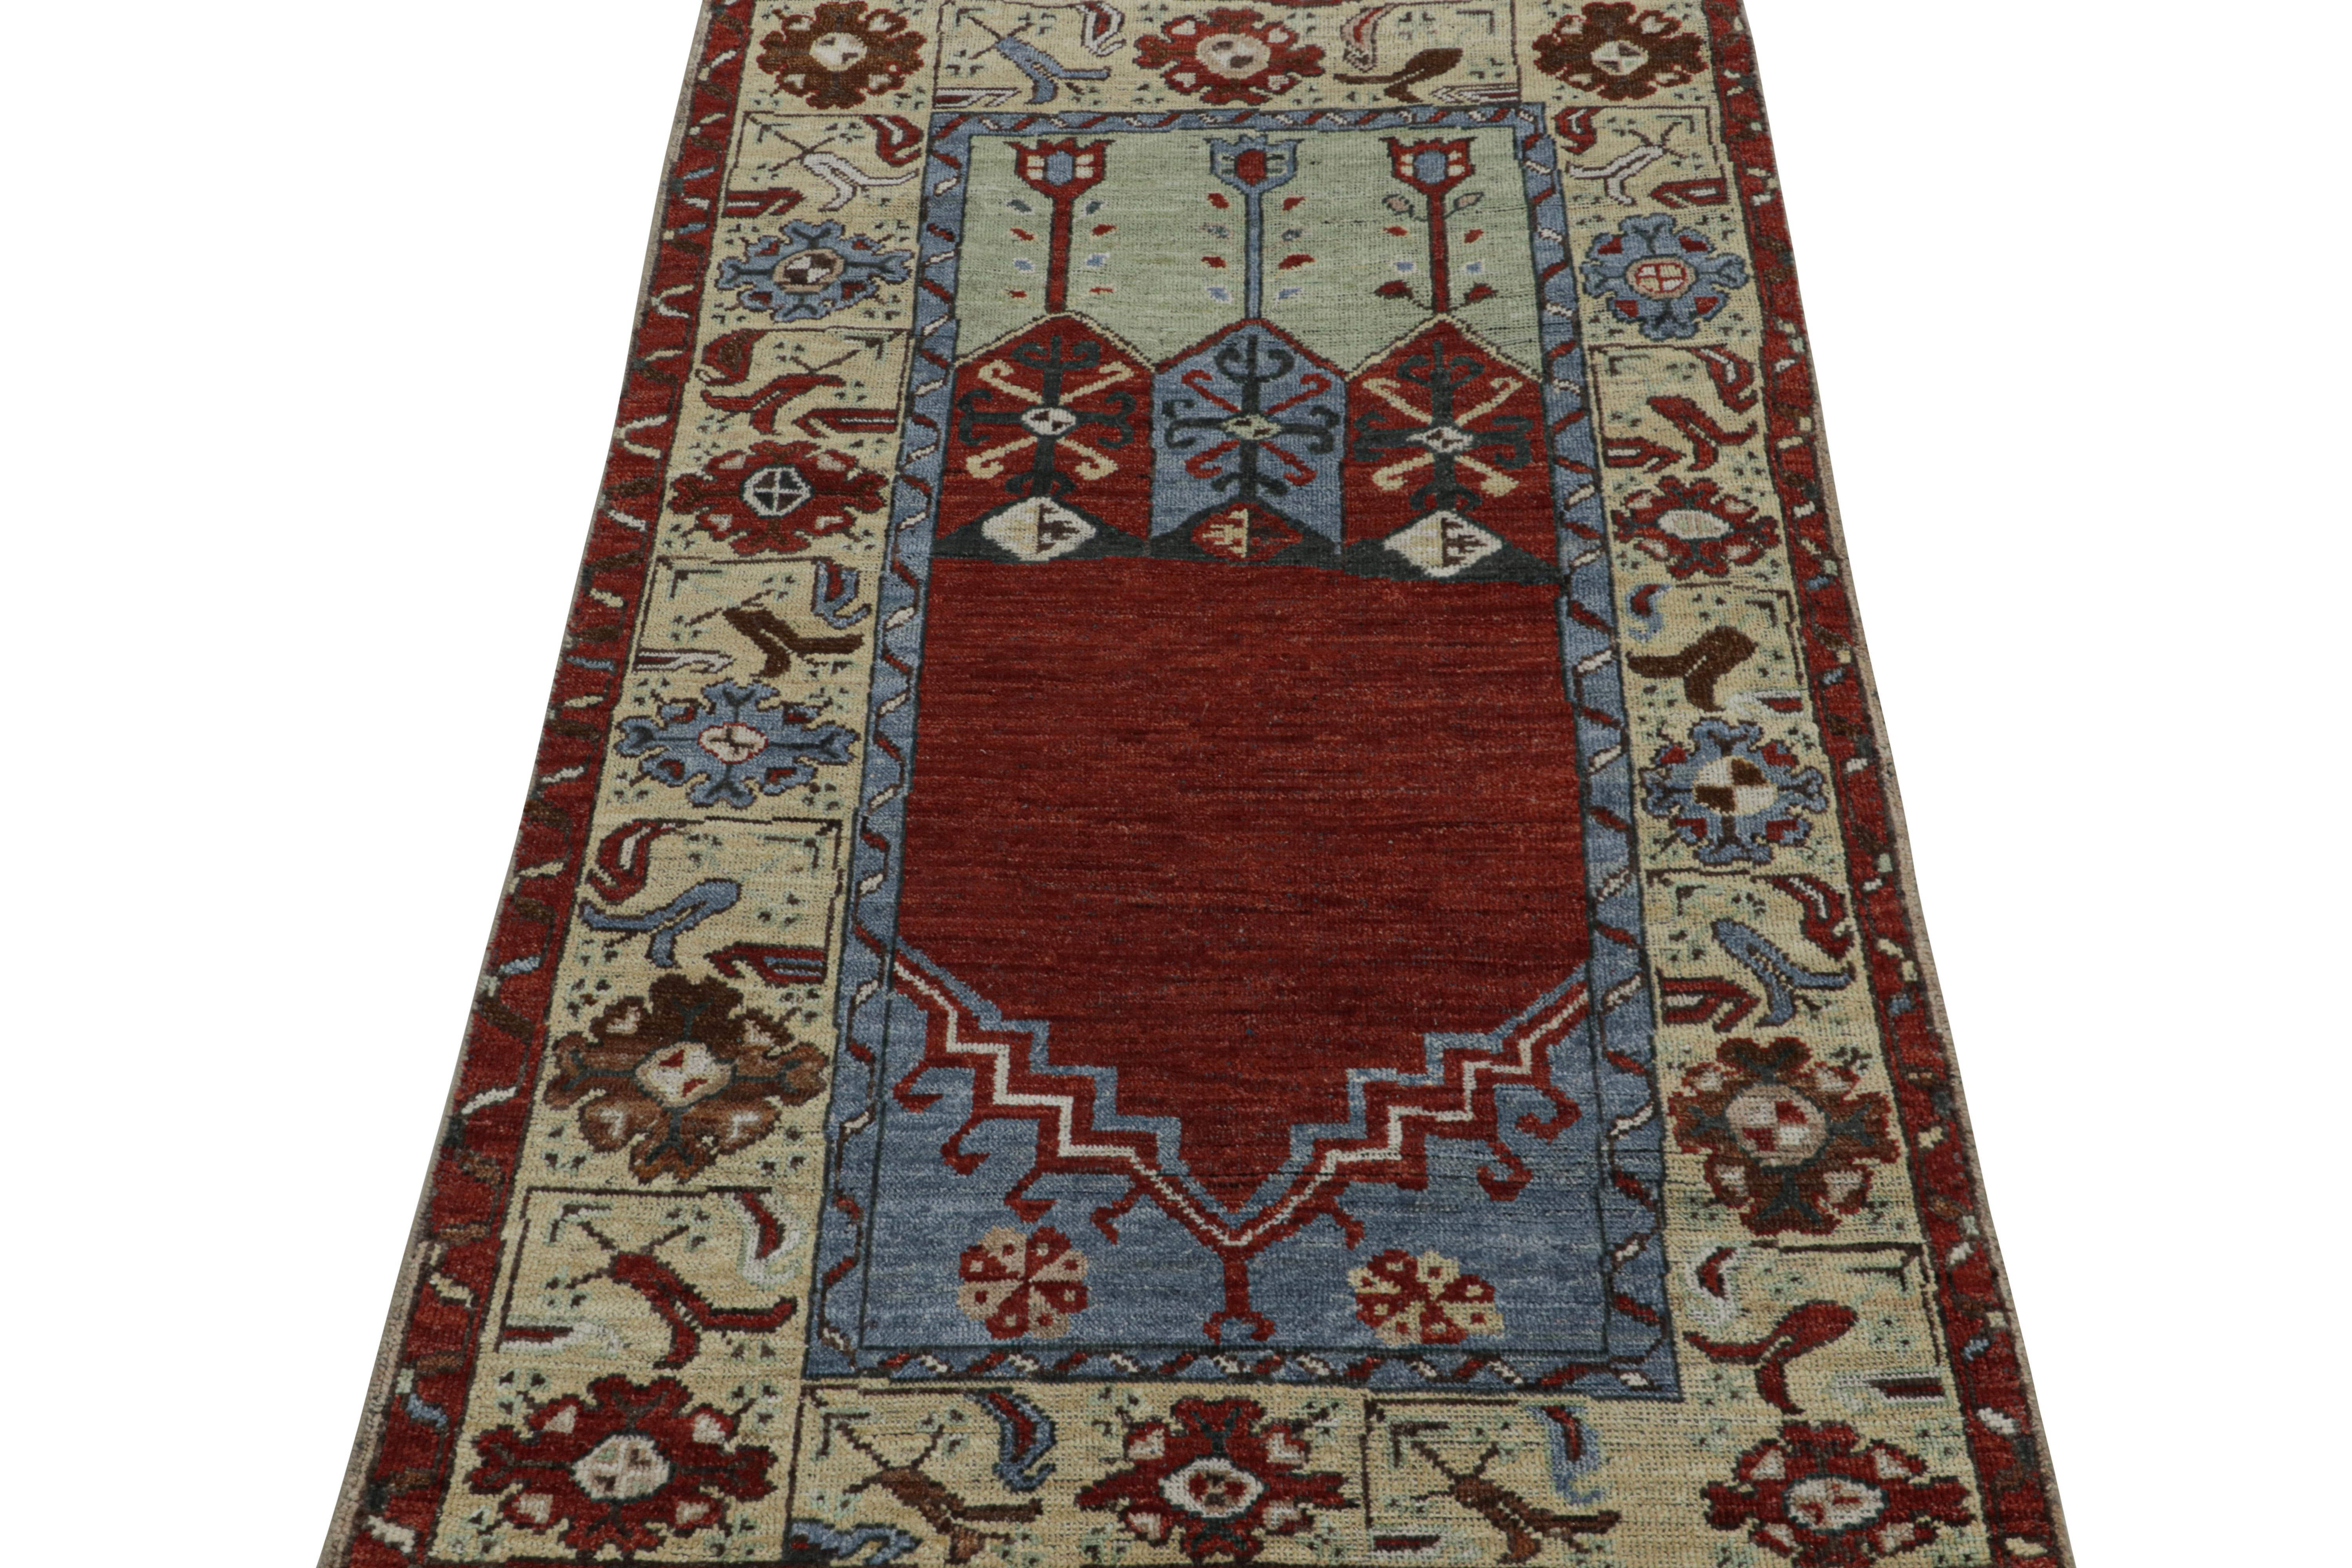 Indian Rug & Kilim’s Tribal Style Runner Rug in Red with Mihrab and Floral Patterns For Sale